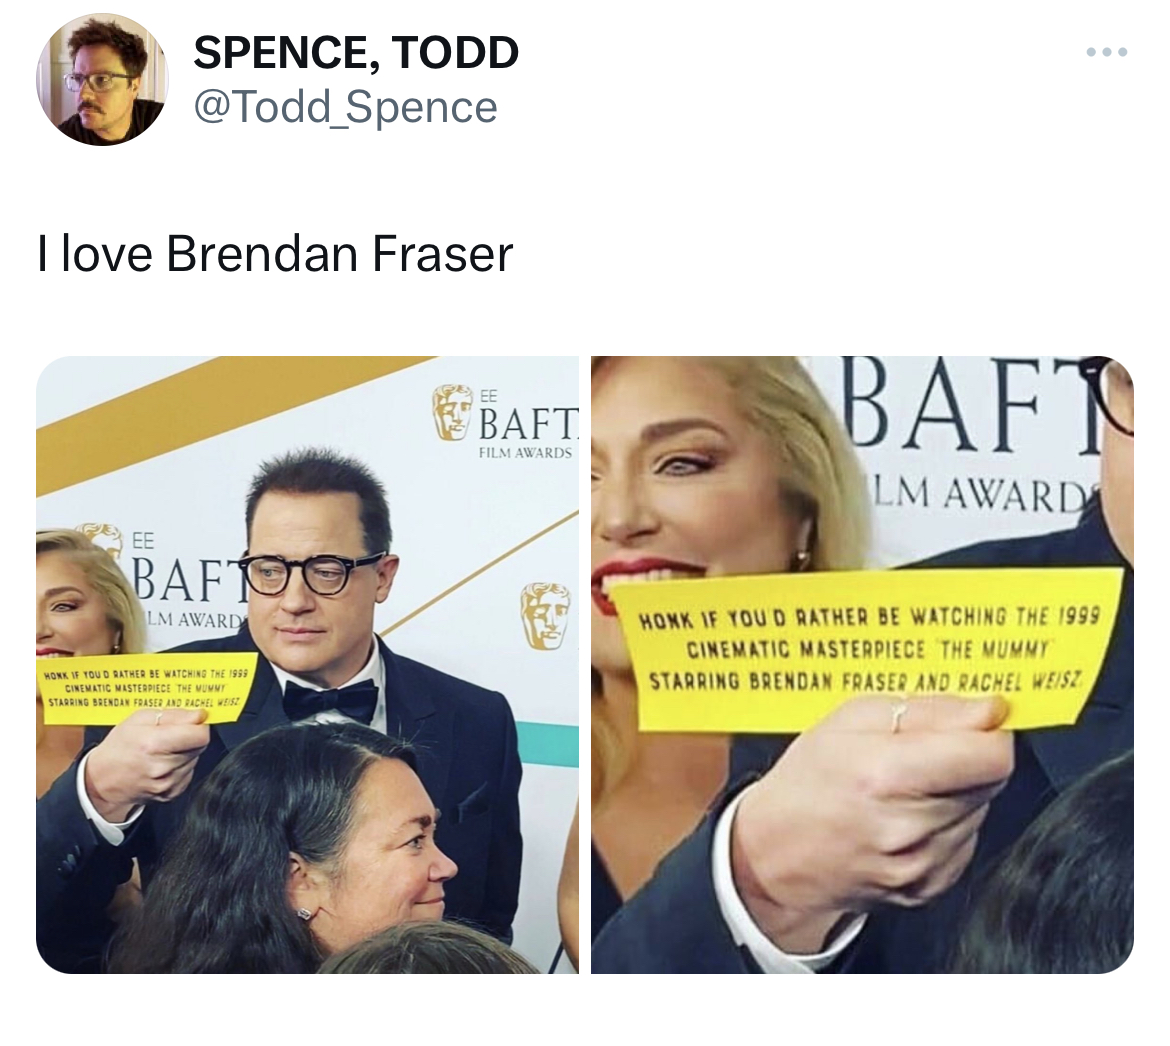 Unhinged Tweets - crafty secrets - Spence, Todd Spence I love Brendan Fraser Ee Baft Lm Awardy Remates The Now Gran Baft Film Awards Baft Lm Award Honk If You D Rather Be Watching The 1999 Cinematic Masterpiece The Mummy Starring Brendan Fraser And Rachel